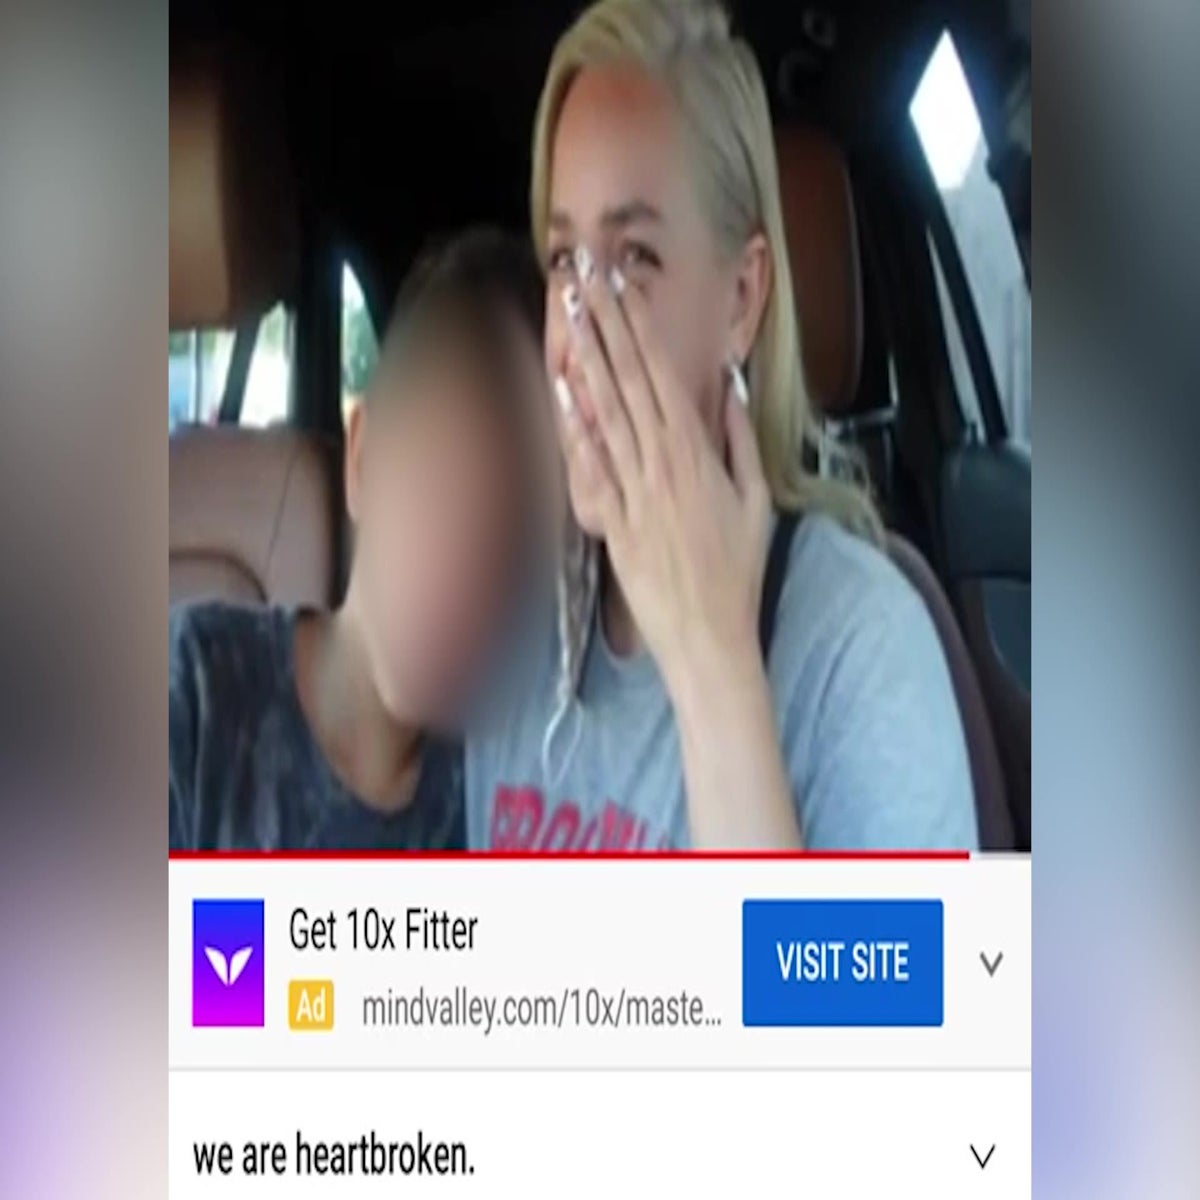 YouTuber accidentally uploads video forcing her crying son to pose for  thumbnail | News | Independent TV